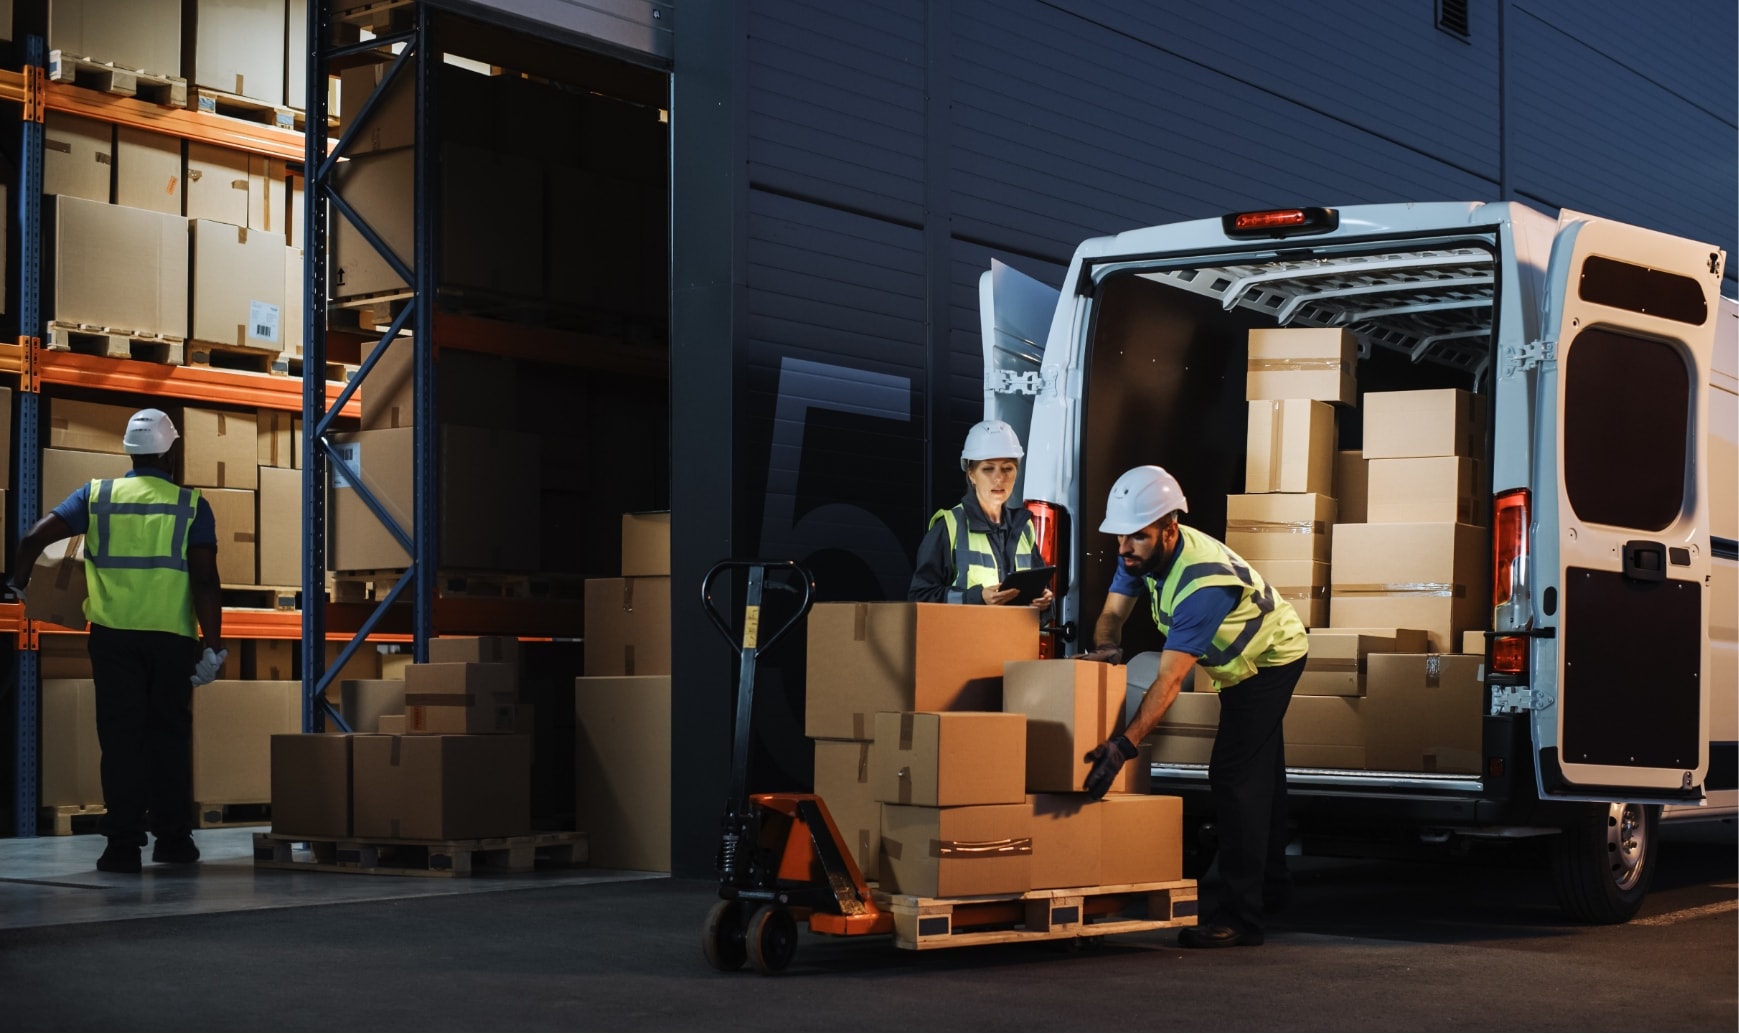 Two logistics operators load parcels into a commercial vehicle outside a warehouse.